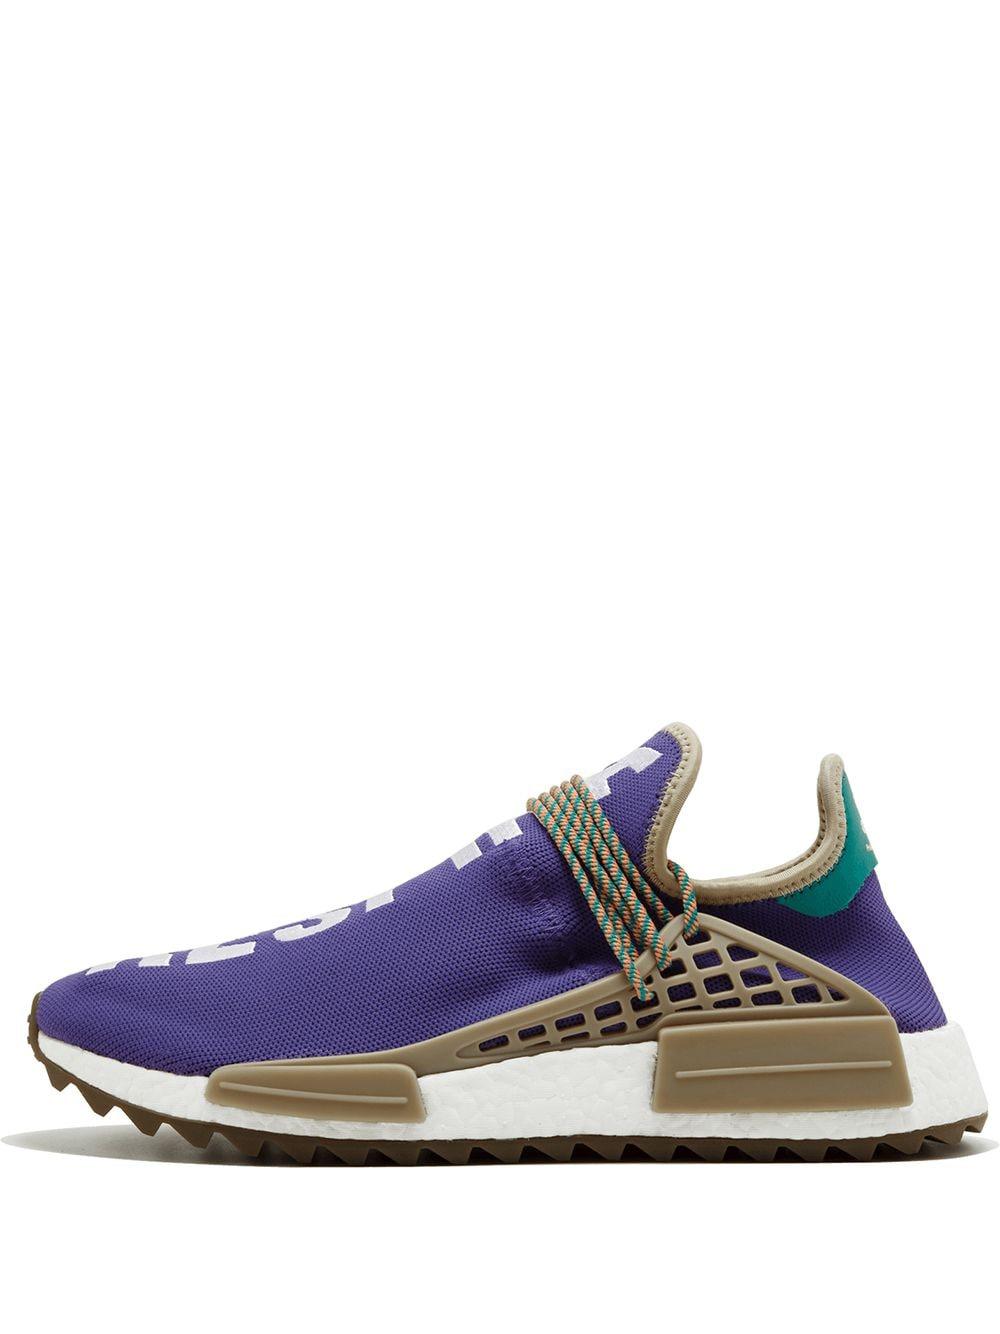 adidas Rubber X Pharrell Williams Human Race Nmd Tr Sneakers in Purple for  Men - Save 73% | Lyst